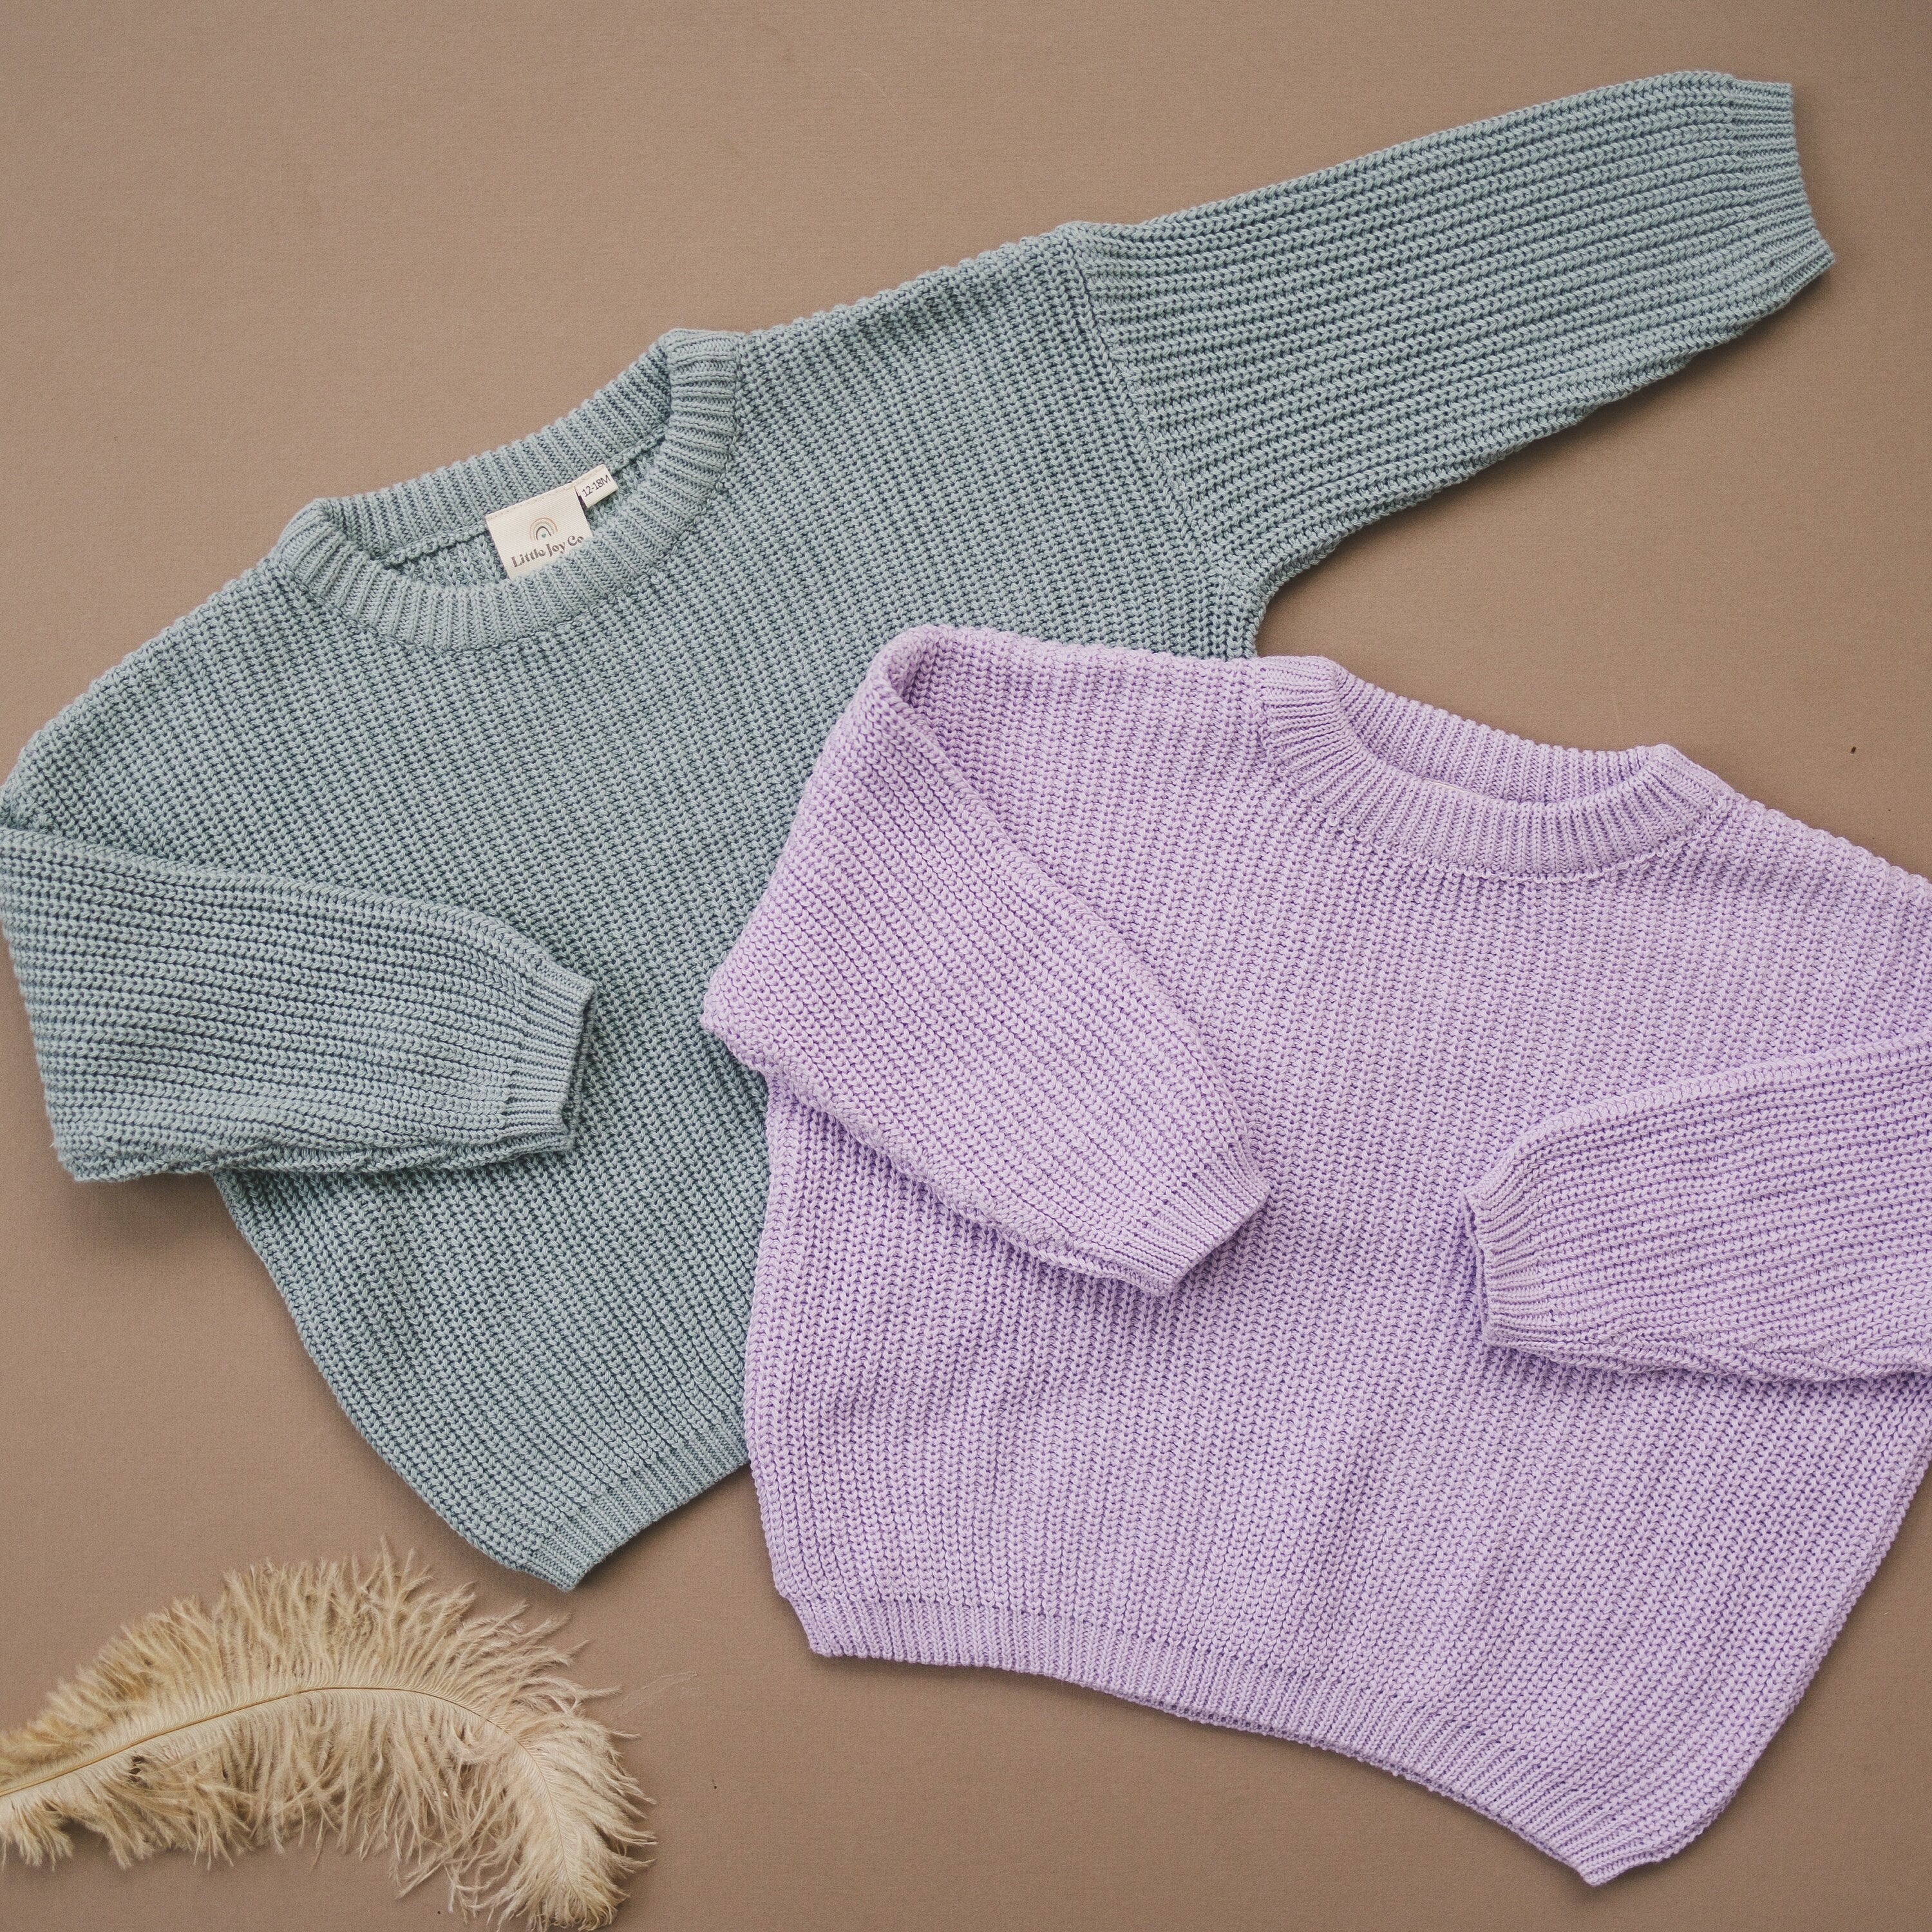 Chunky Knit Sweater - more colors